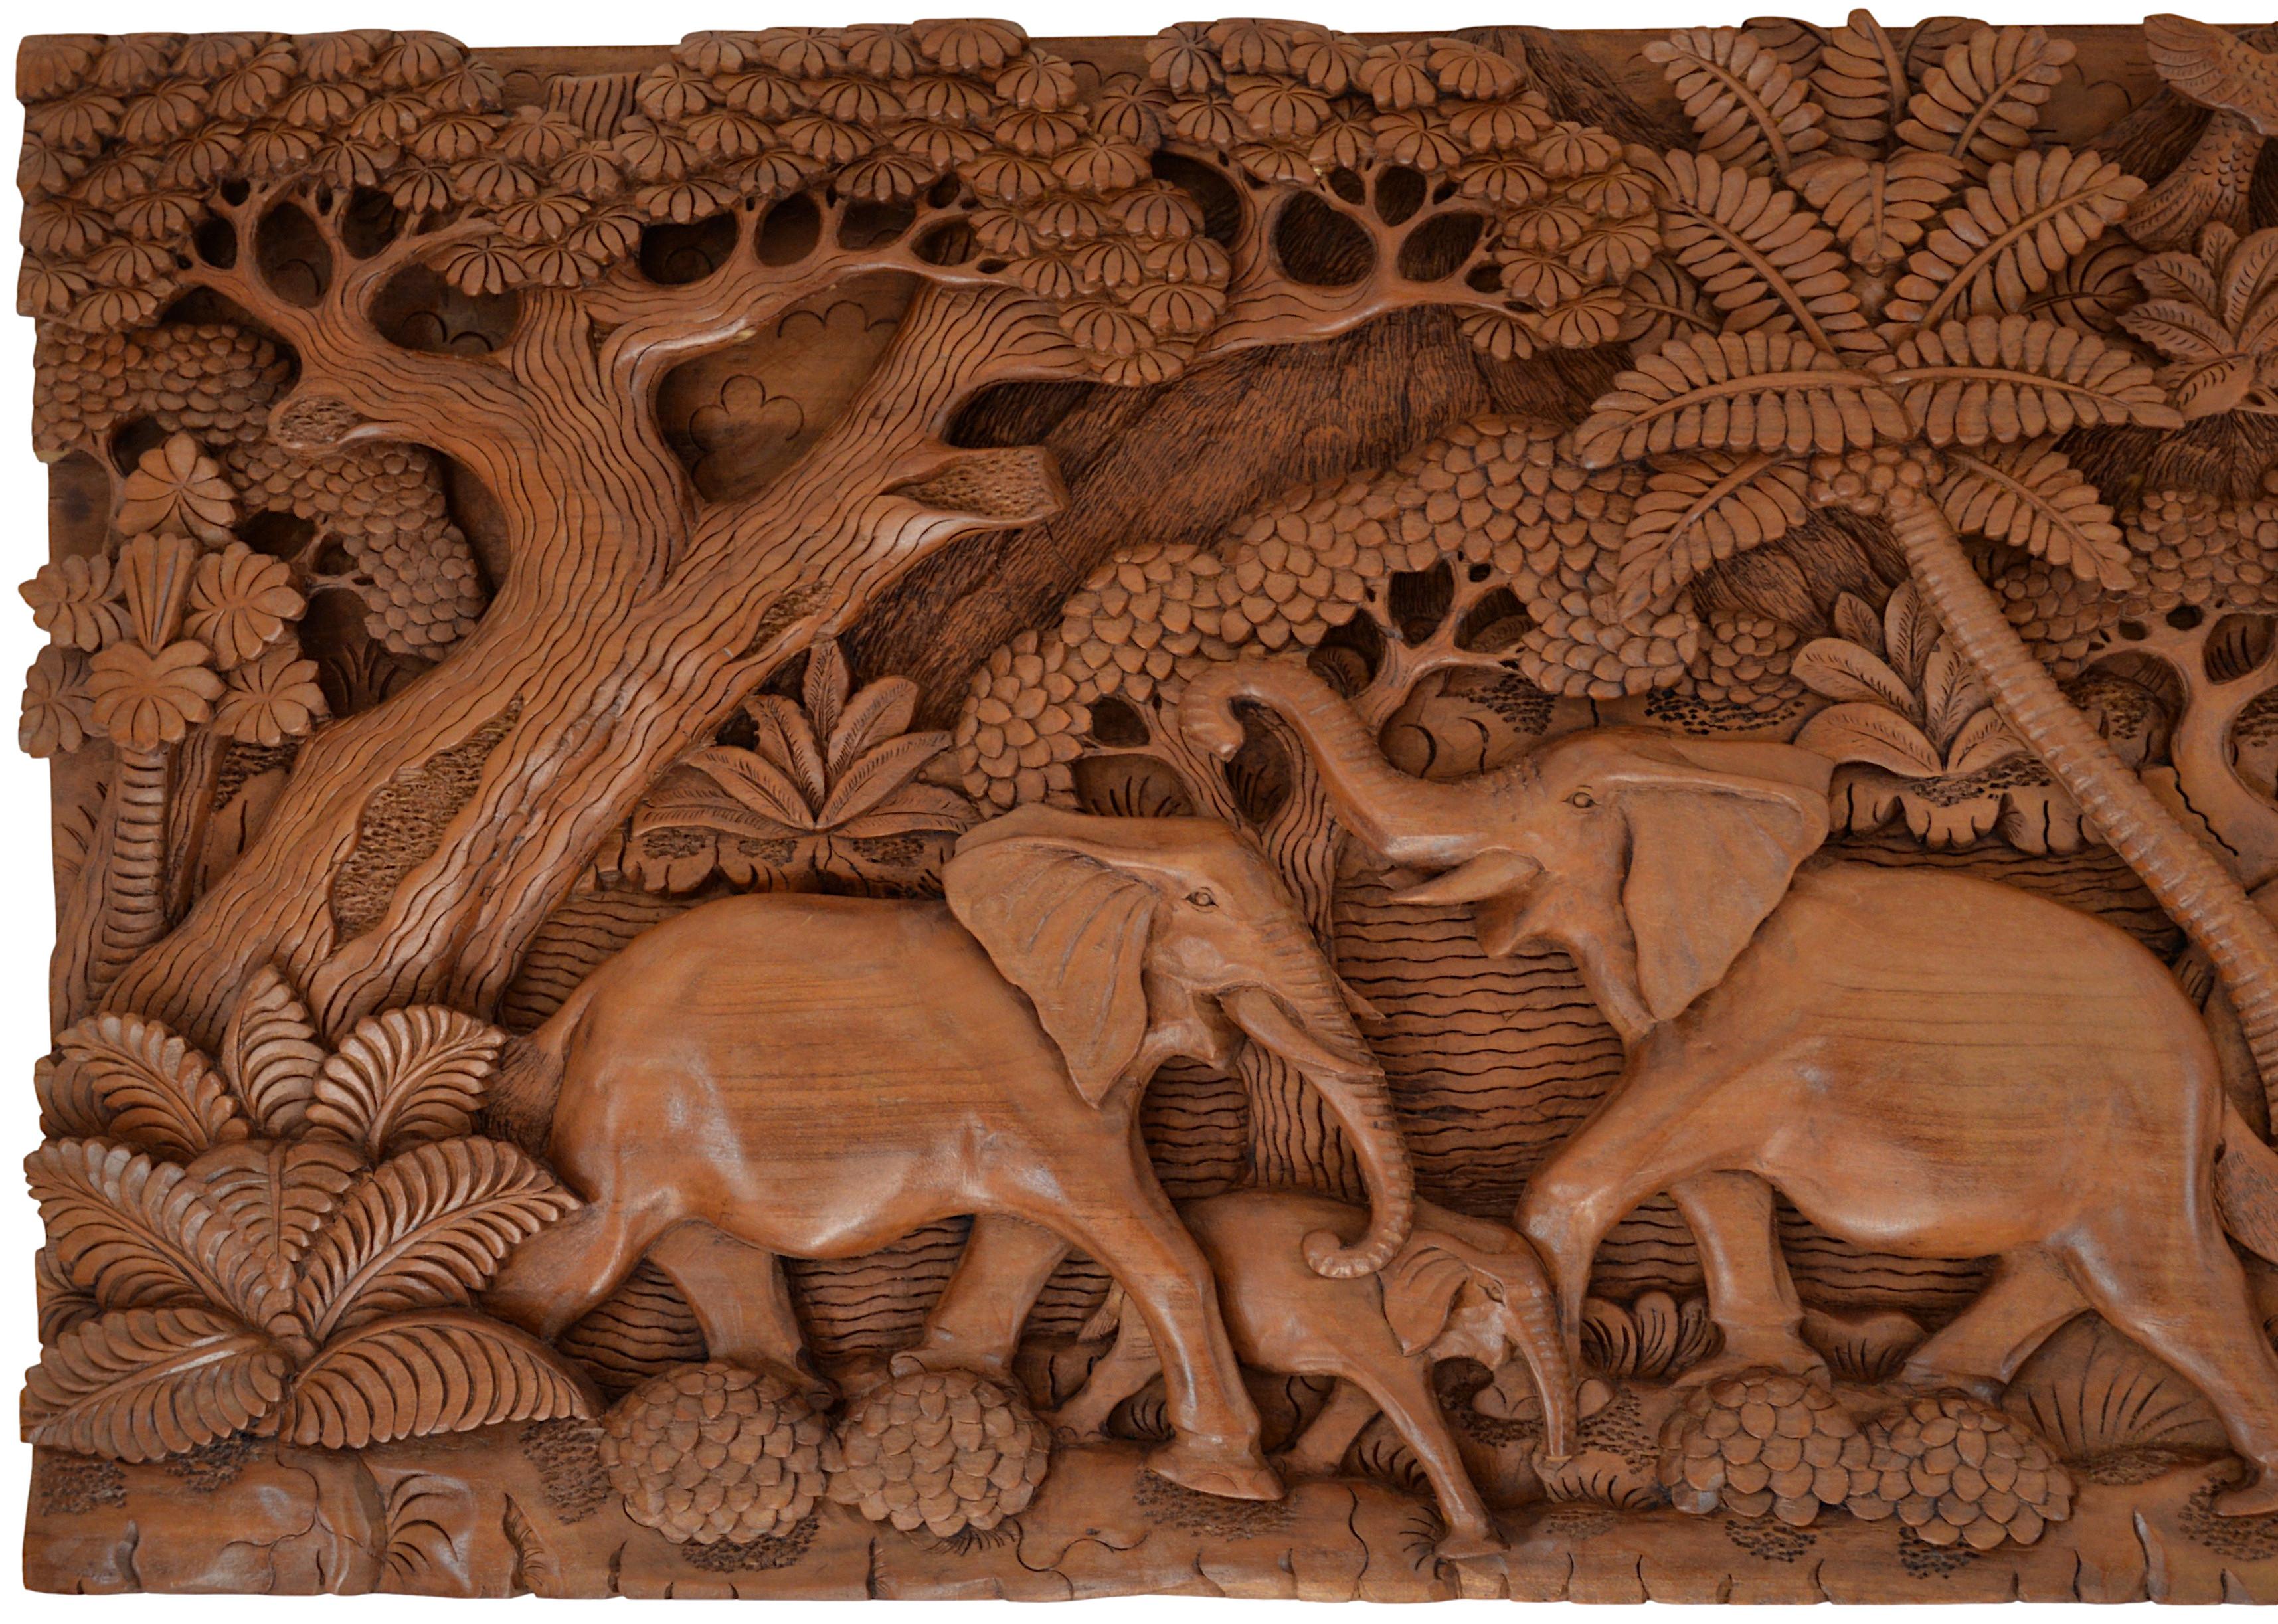 Large bas-relief. Carved wood, 1950s-1960s. Width: 48